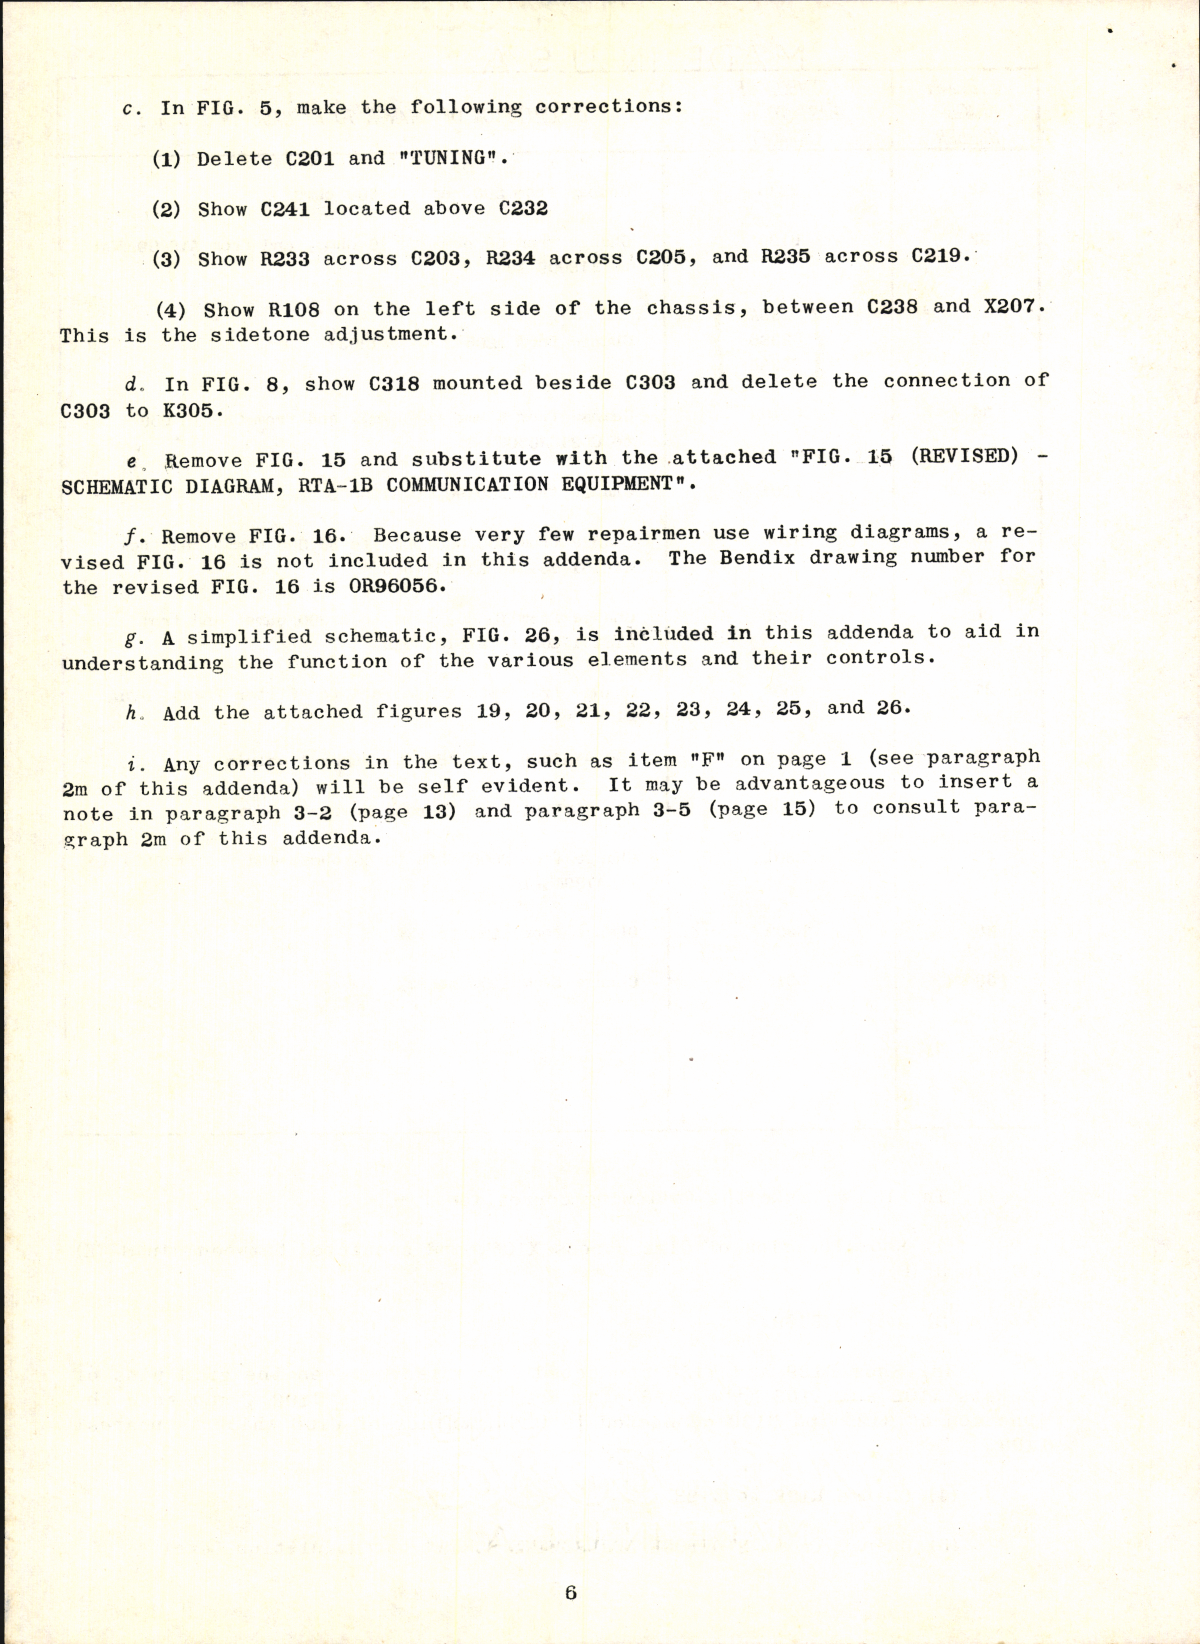 Sample page 6 from AirCorps Library document: Instruction Book for Model RTA-1B Communication Equipment